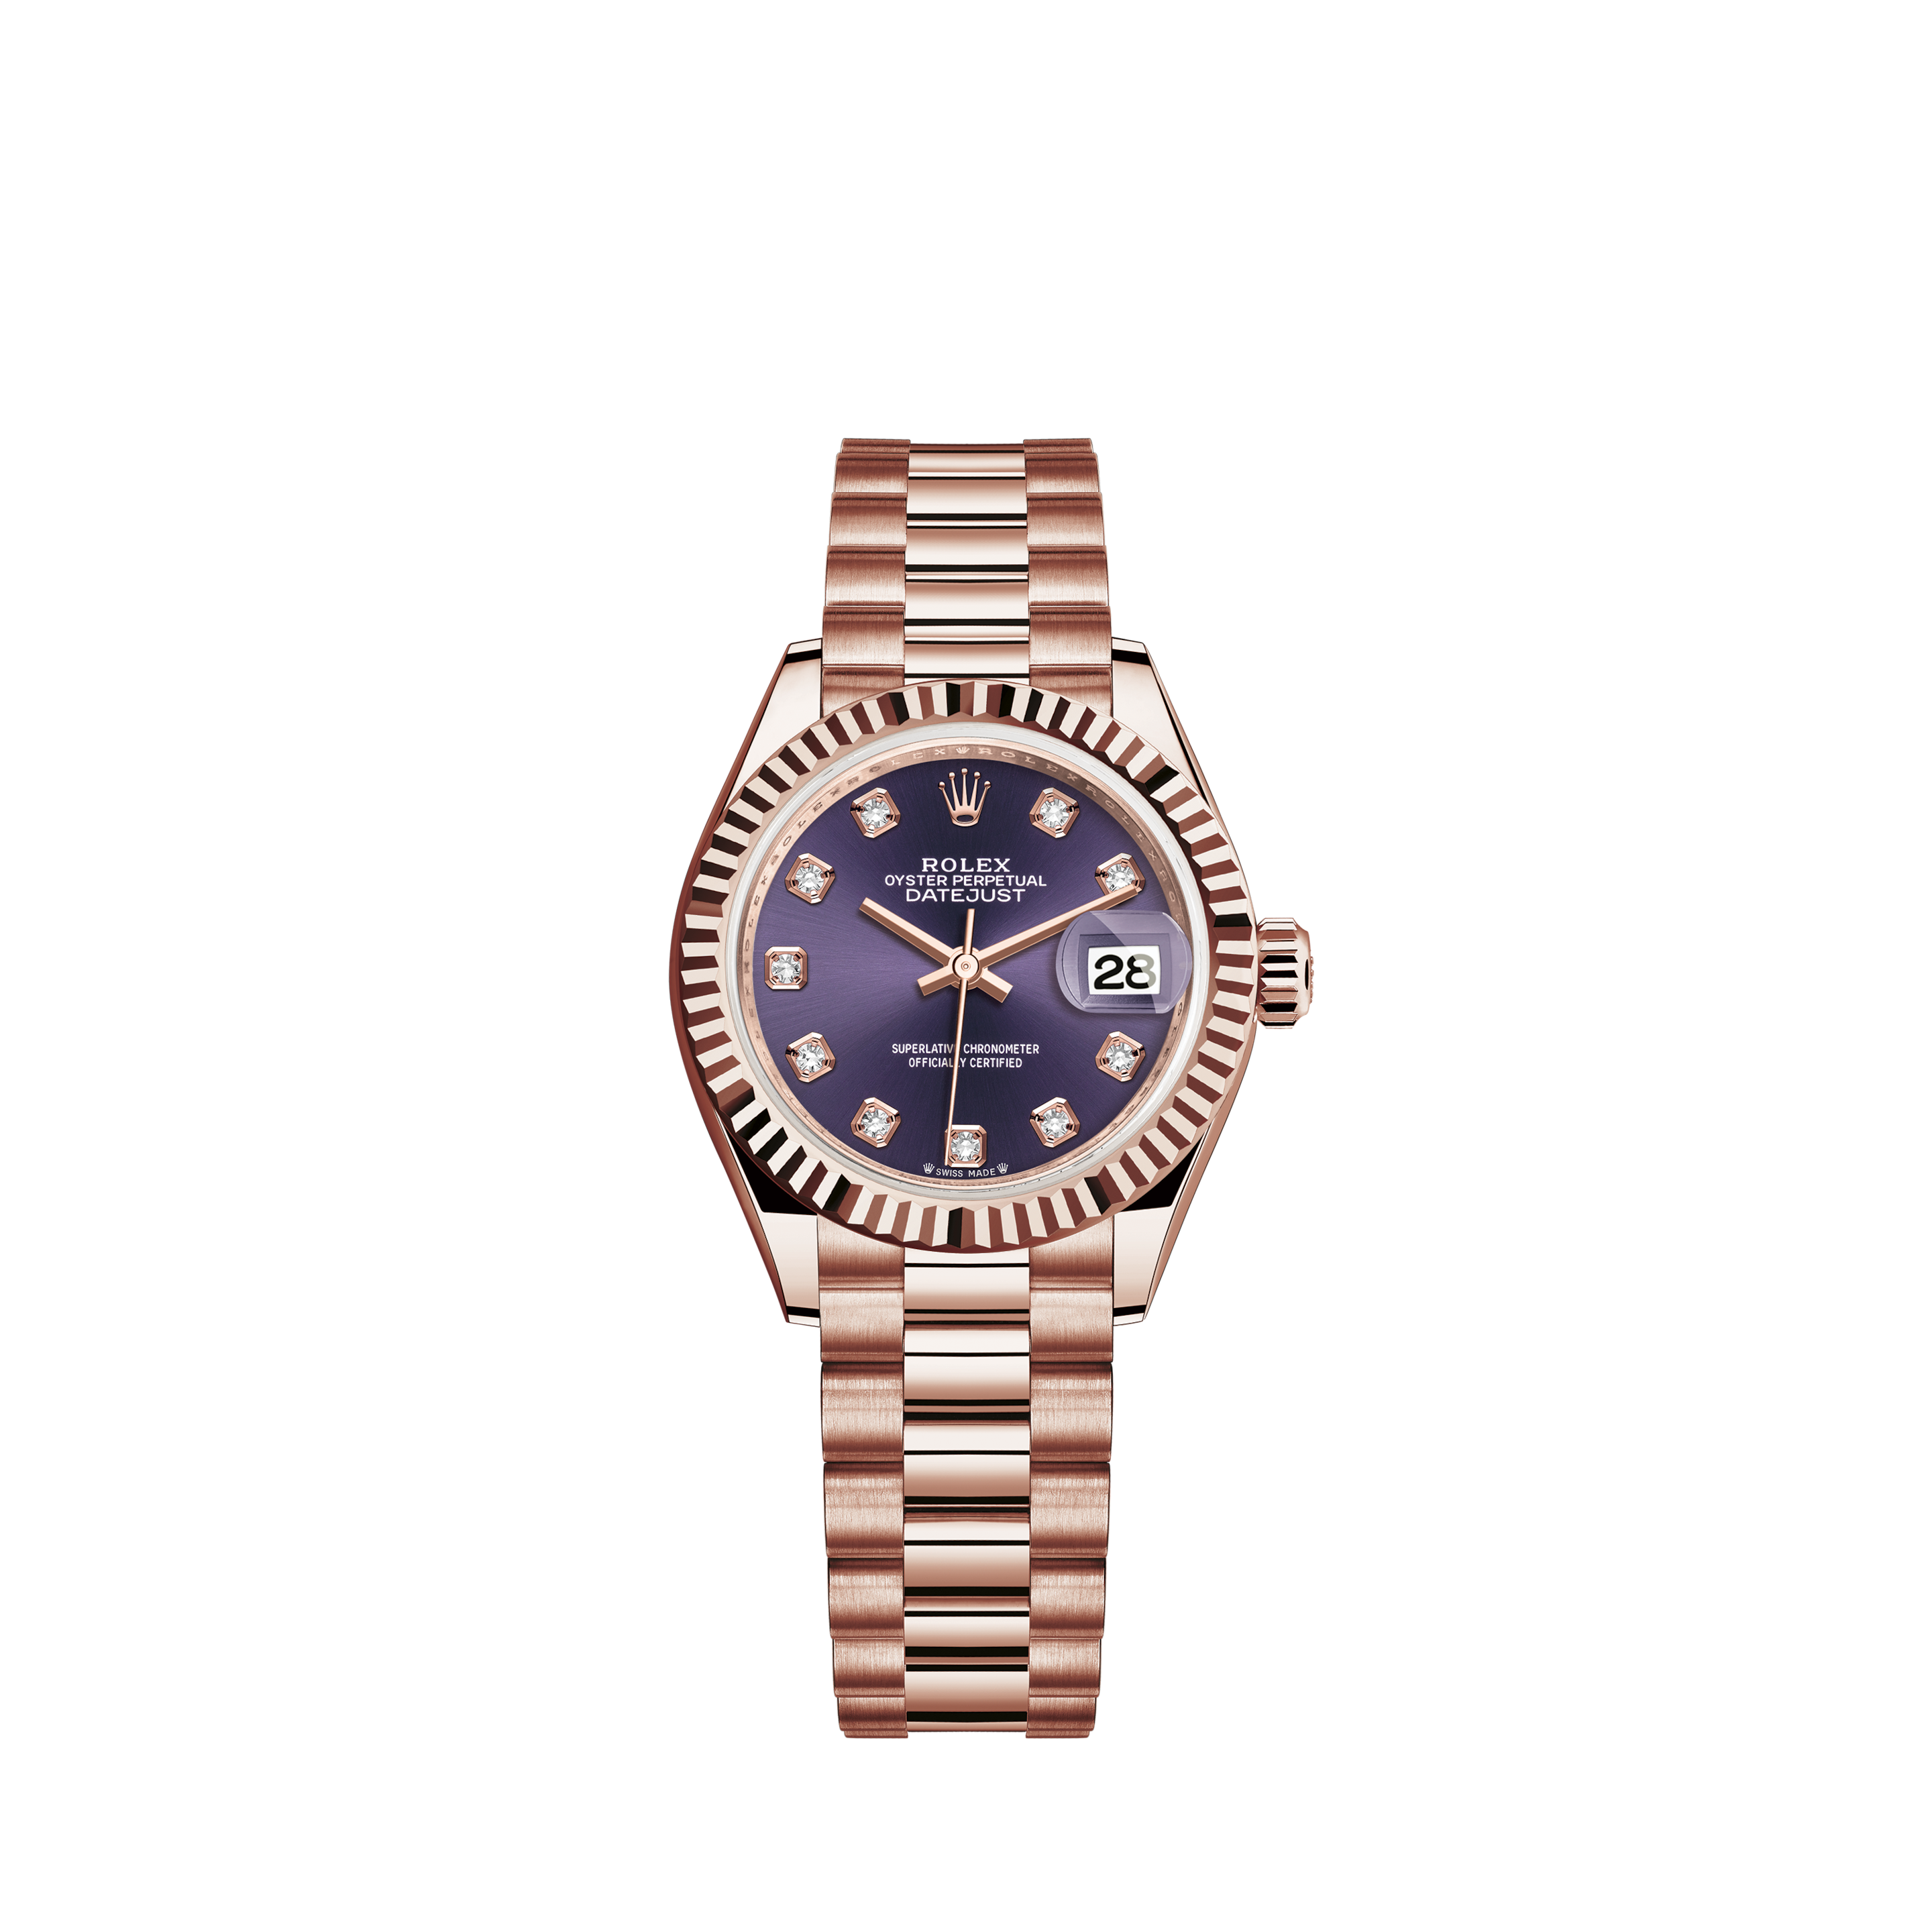 Rolex Datejust 31mm Steel And 18k Everose Gold White Mother-of-Pearl Diamond Dial Jubilee BraceletRolex Datejust 31mm Steel And 18k Yellow Gold Black Mother-of-Pearl Diamond Dial Jubilee Bracelet